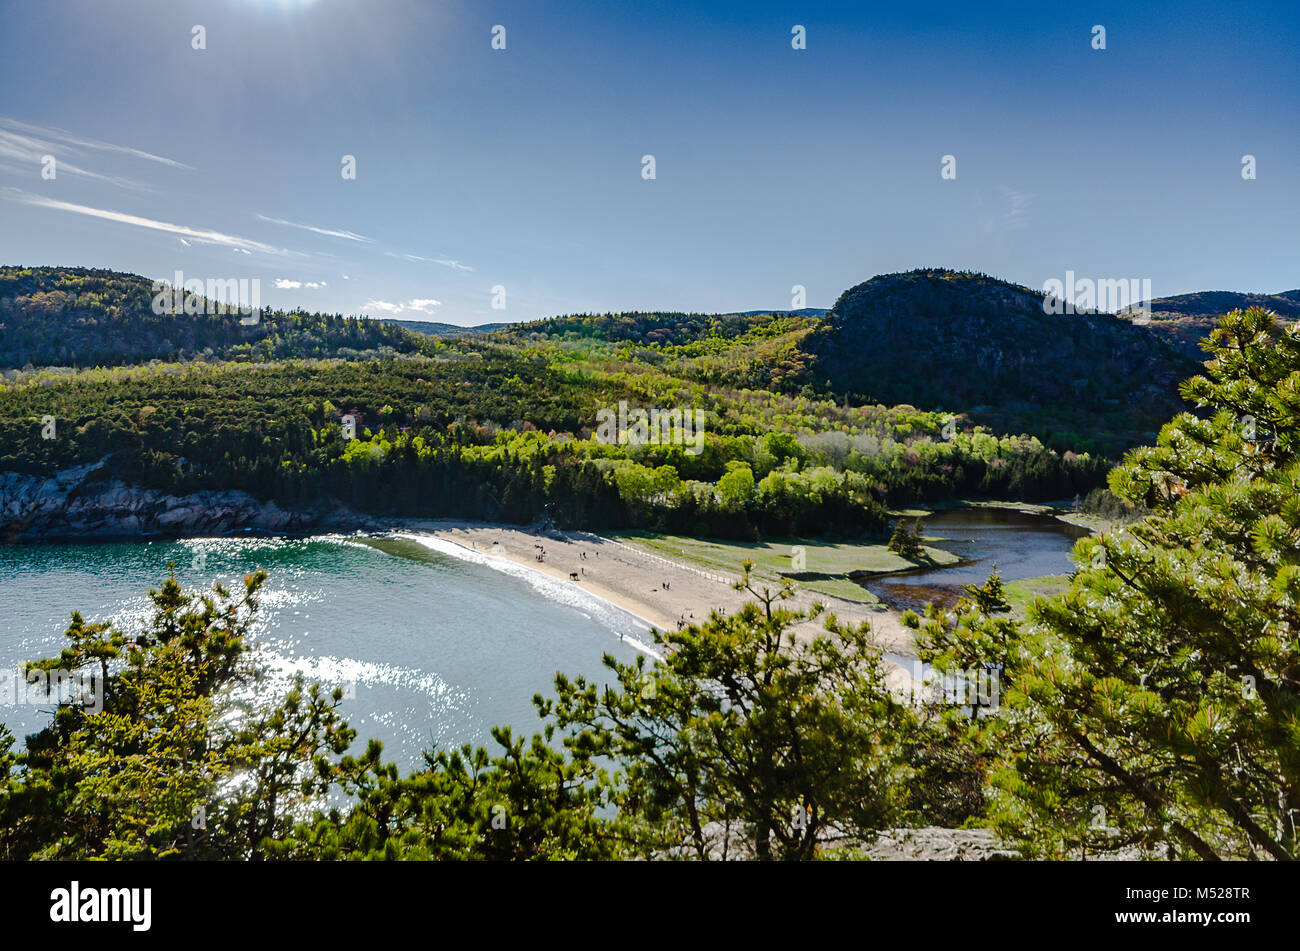 Set between granite mountains and rocky shores of Mount Desert Island, this beach is one of the most popular spots at Acadia National Park. Stock Photo